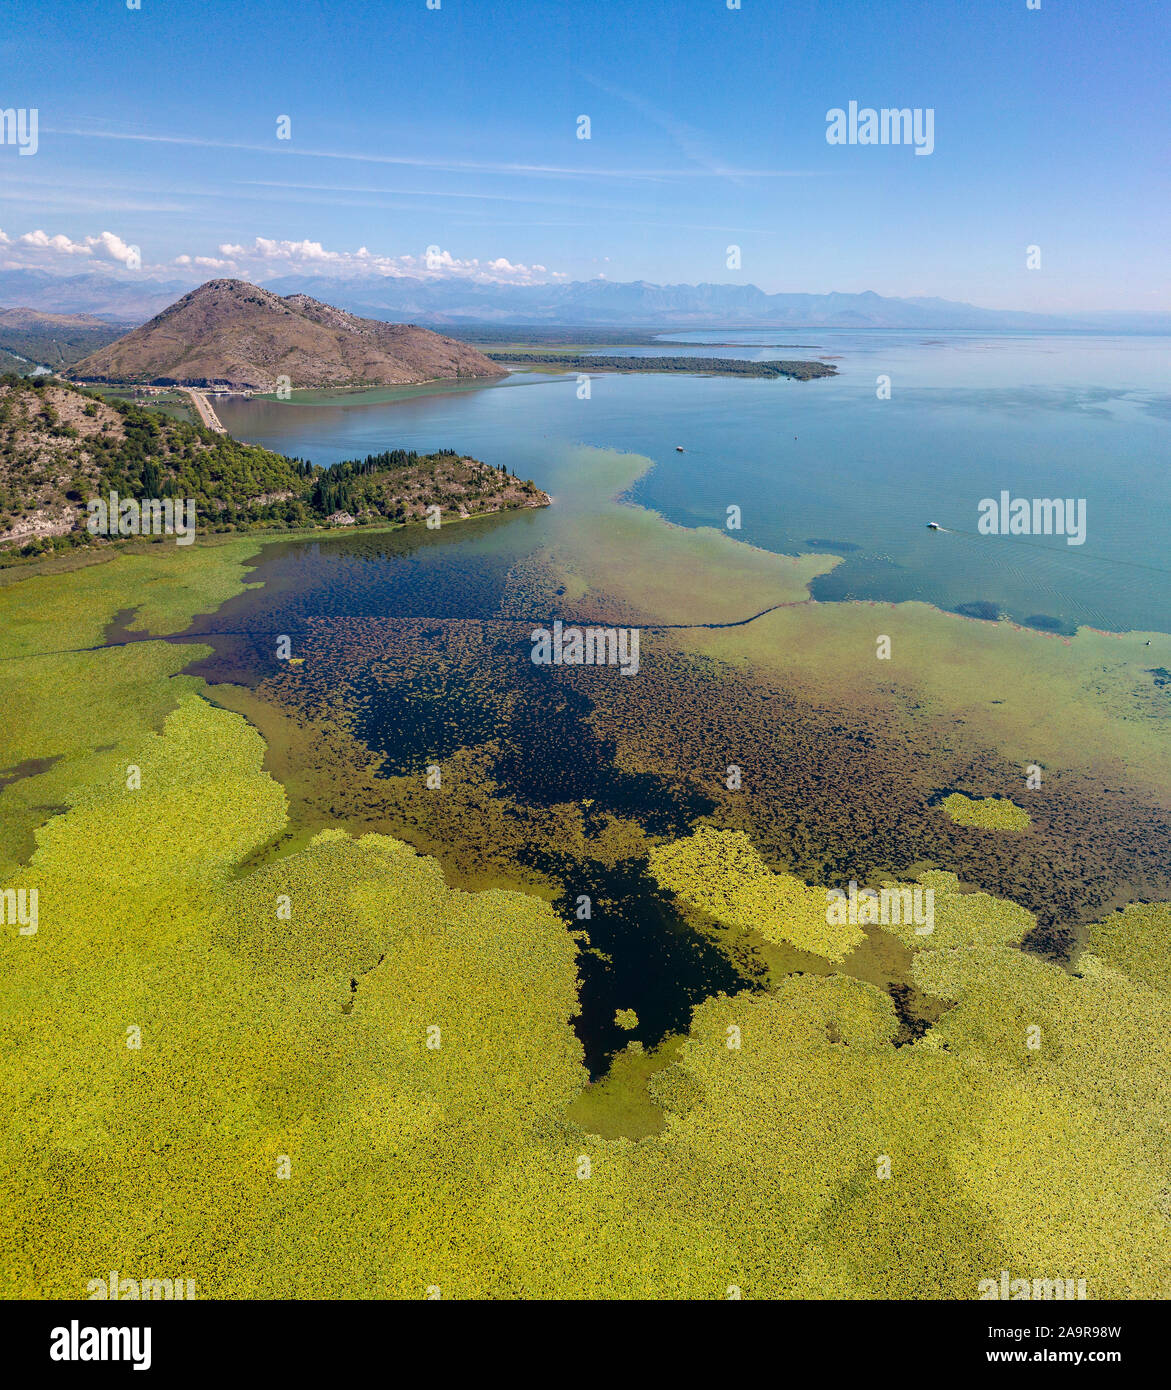 Aerial view of Lake Skadar or Lake Scutari, Montenegro. Surrounded by the national park from untouched nature and wildlife, hills and mountains Stock Photo